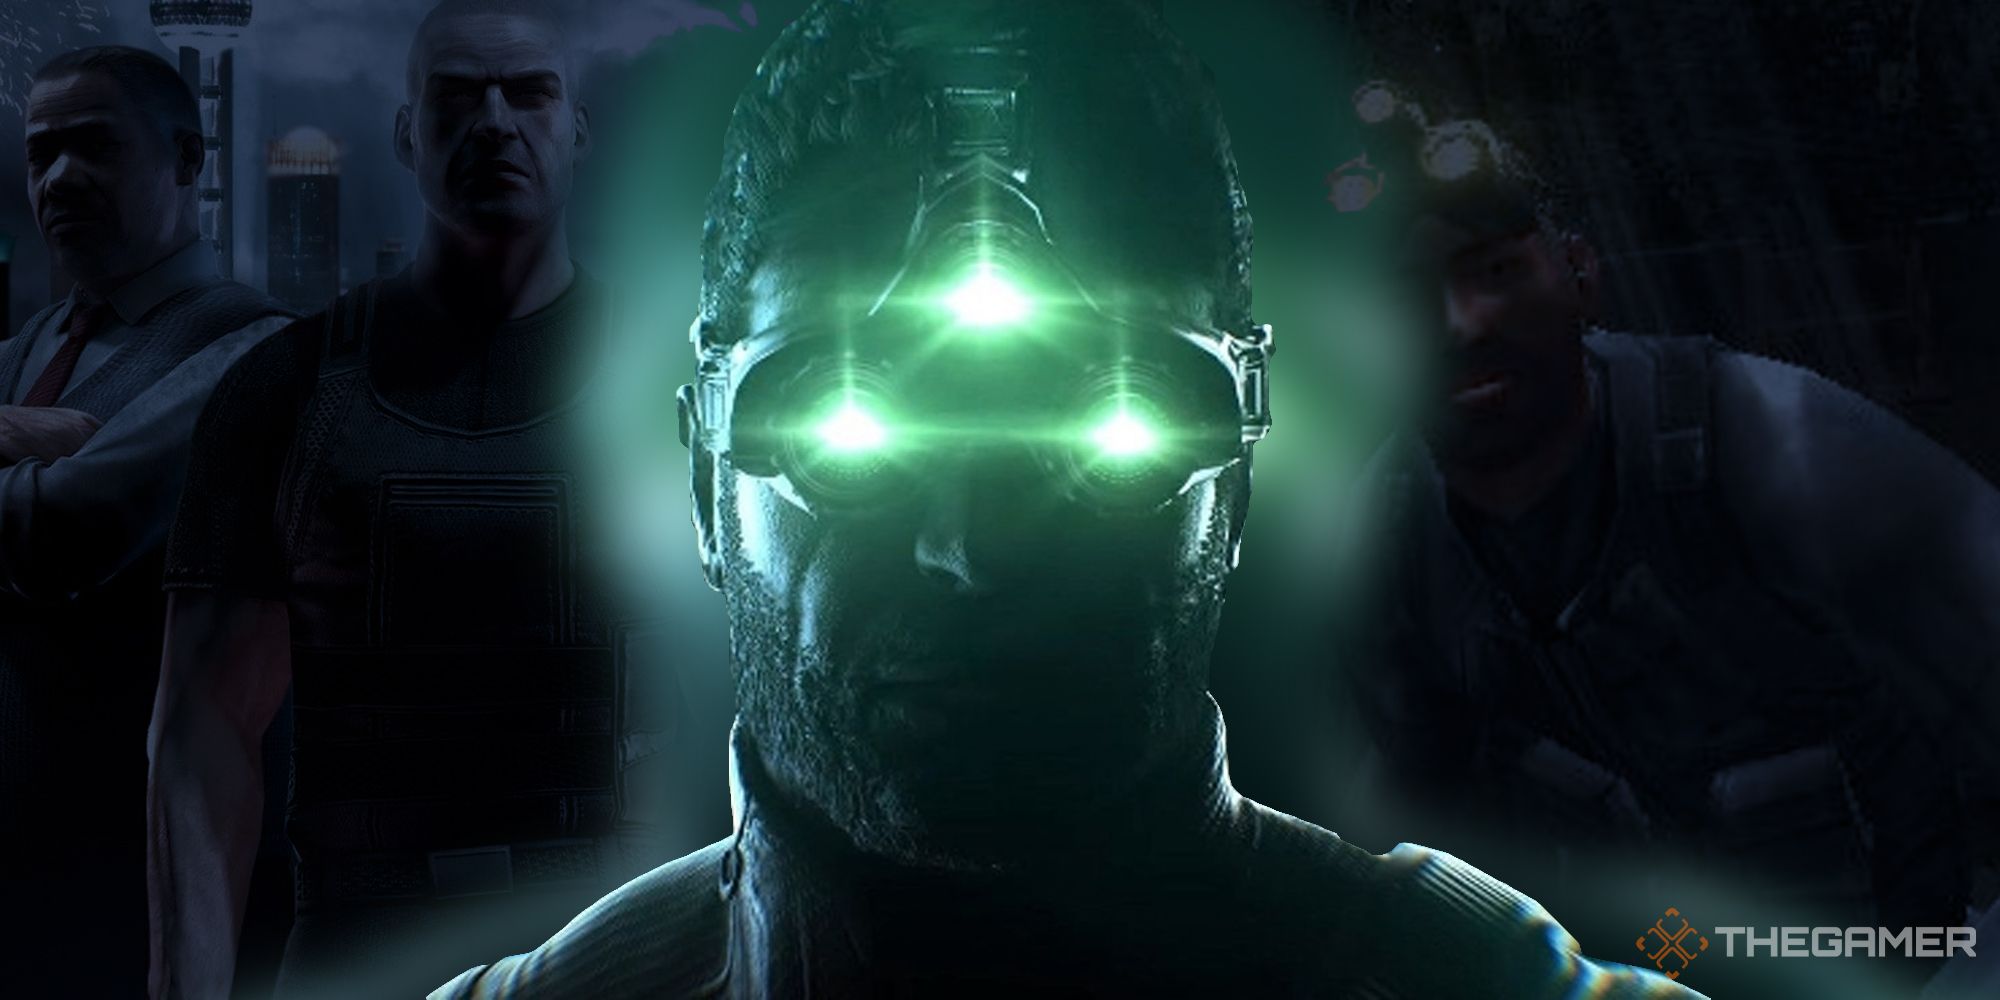 Splinter Cell' may be revived according to development sources